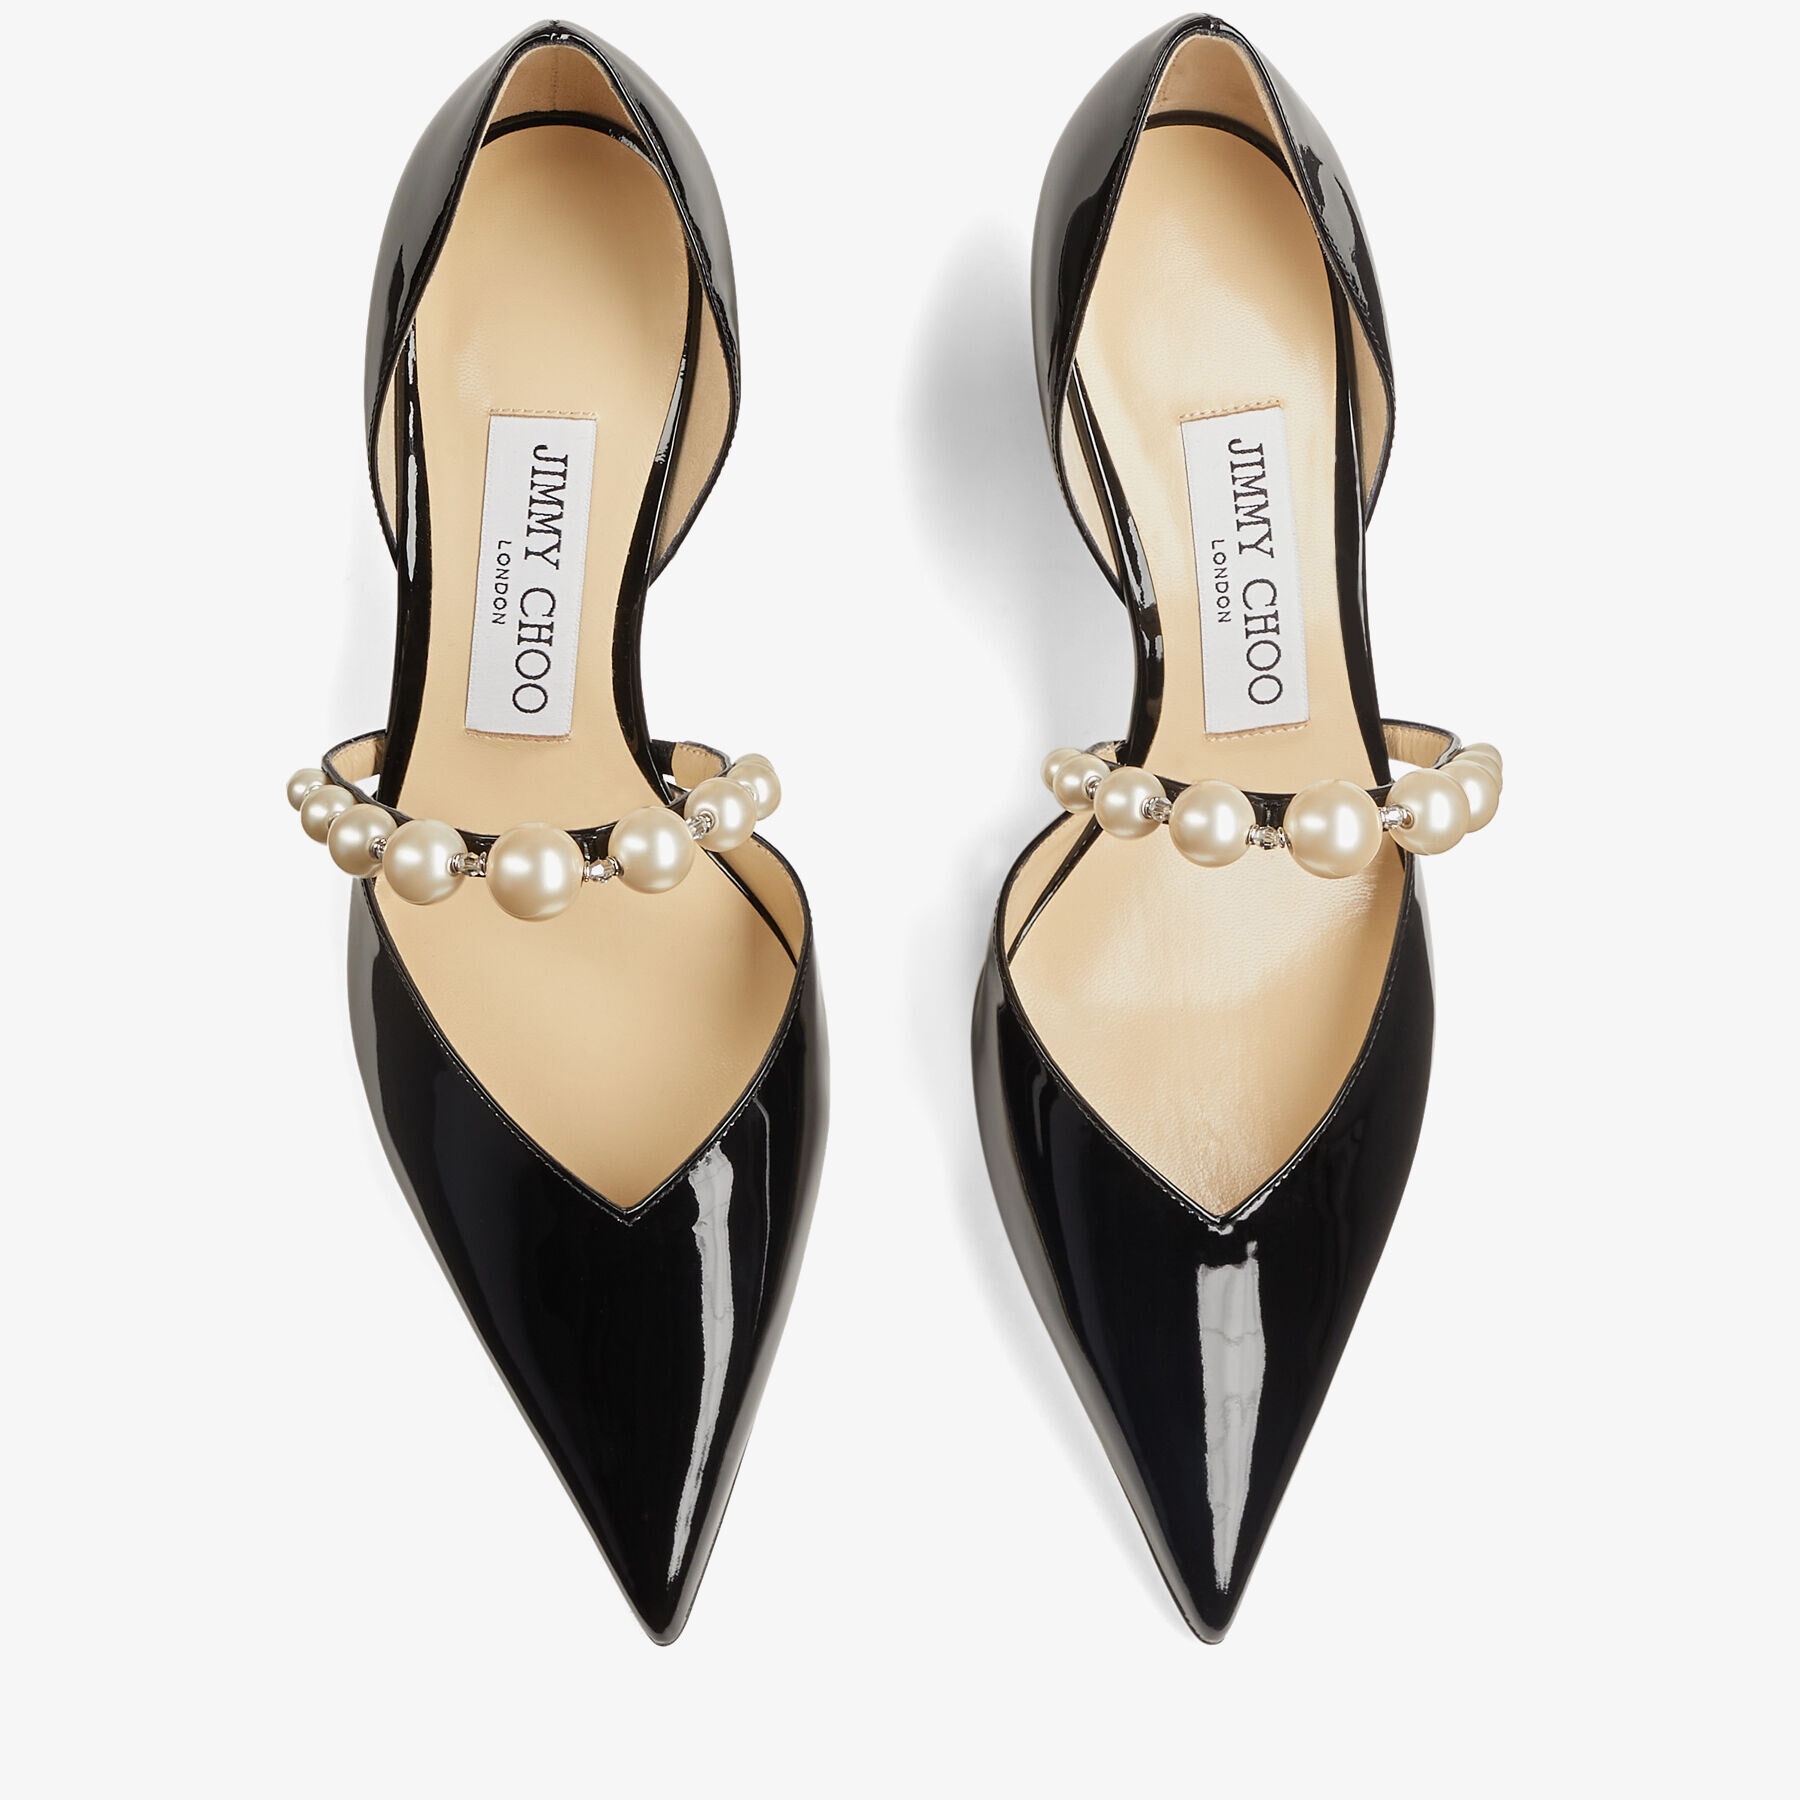 Aurelie 65
Black Patent Leather Pointed Pumps with Pearl Embellishment - 5